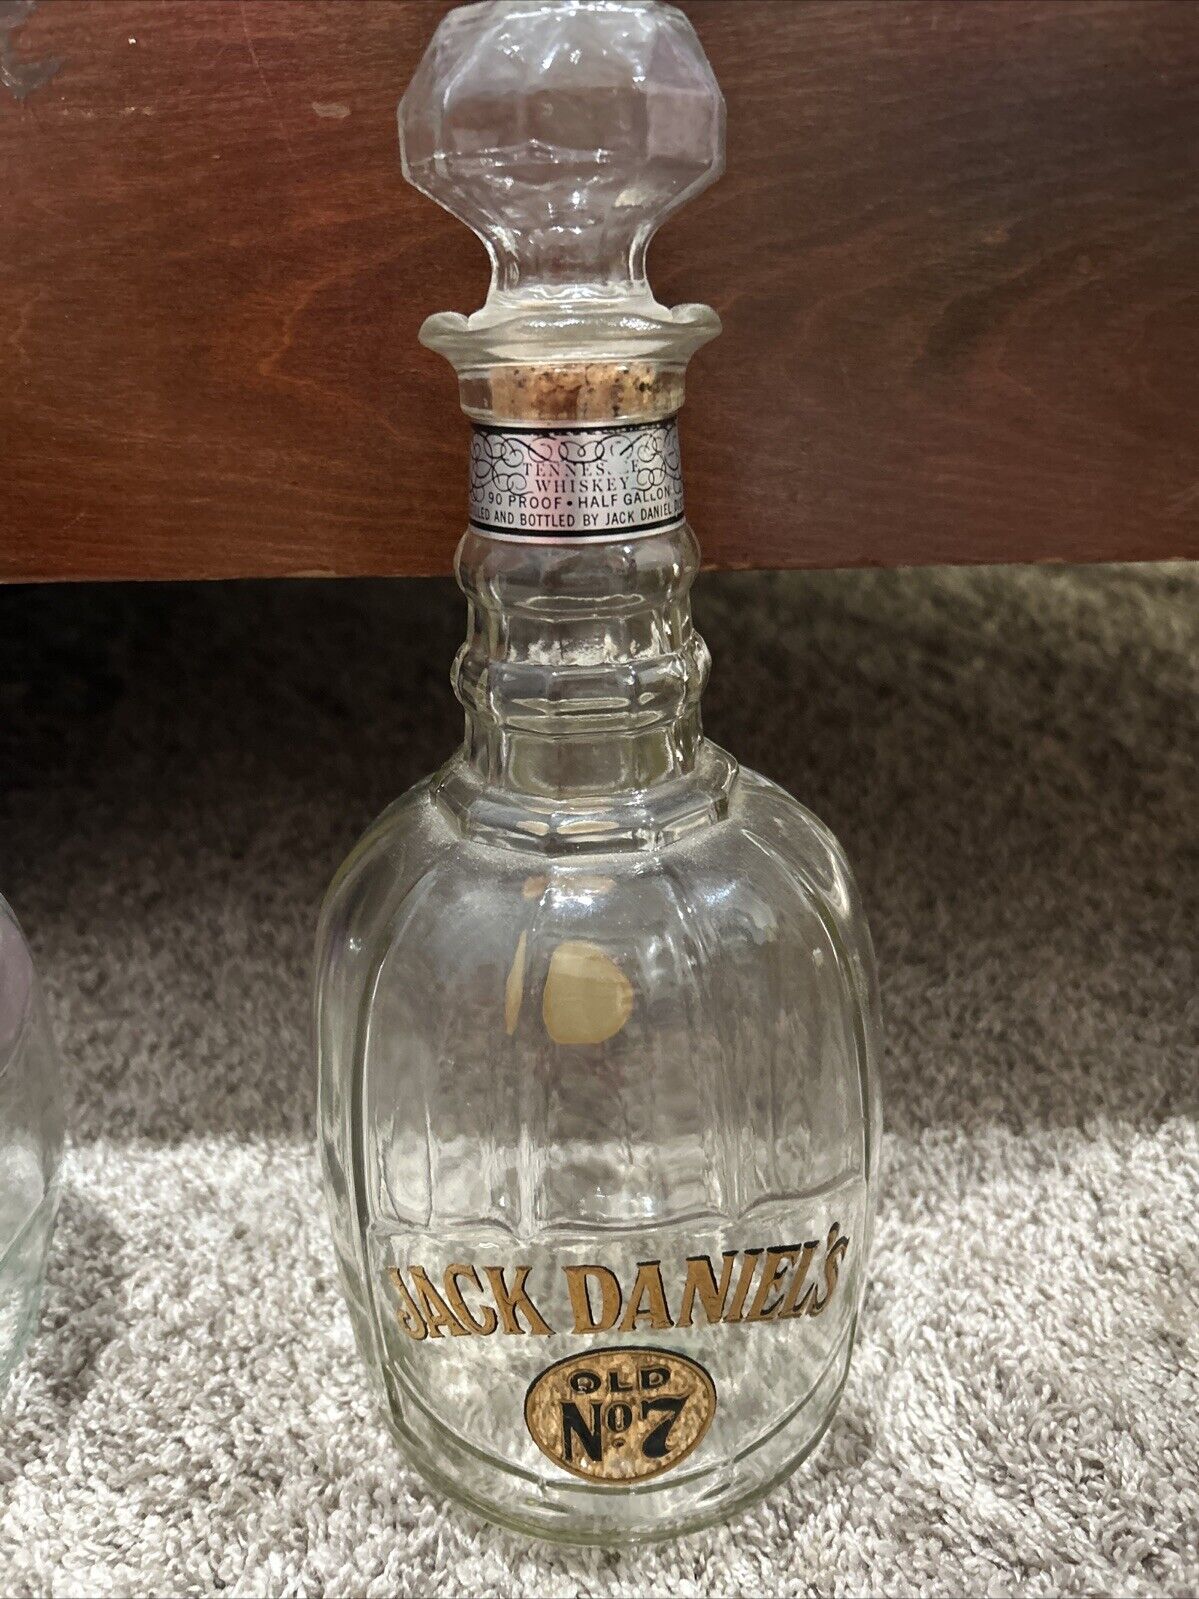 1971 Jack Daniels Old No. 7 Maxwell House Whiskey Decanter